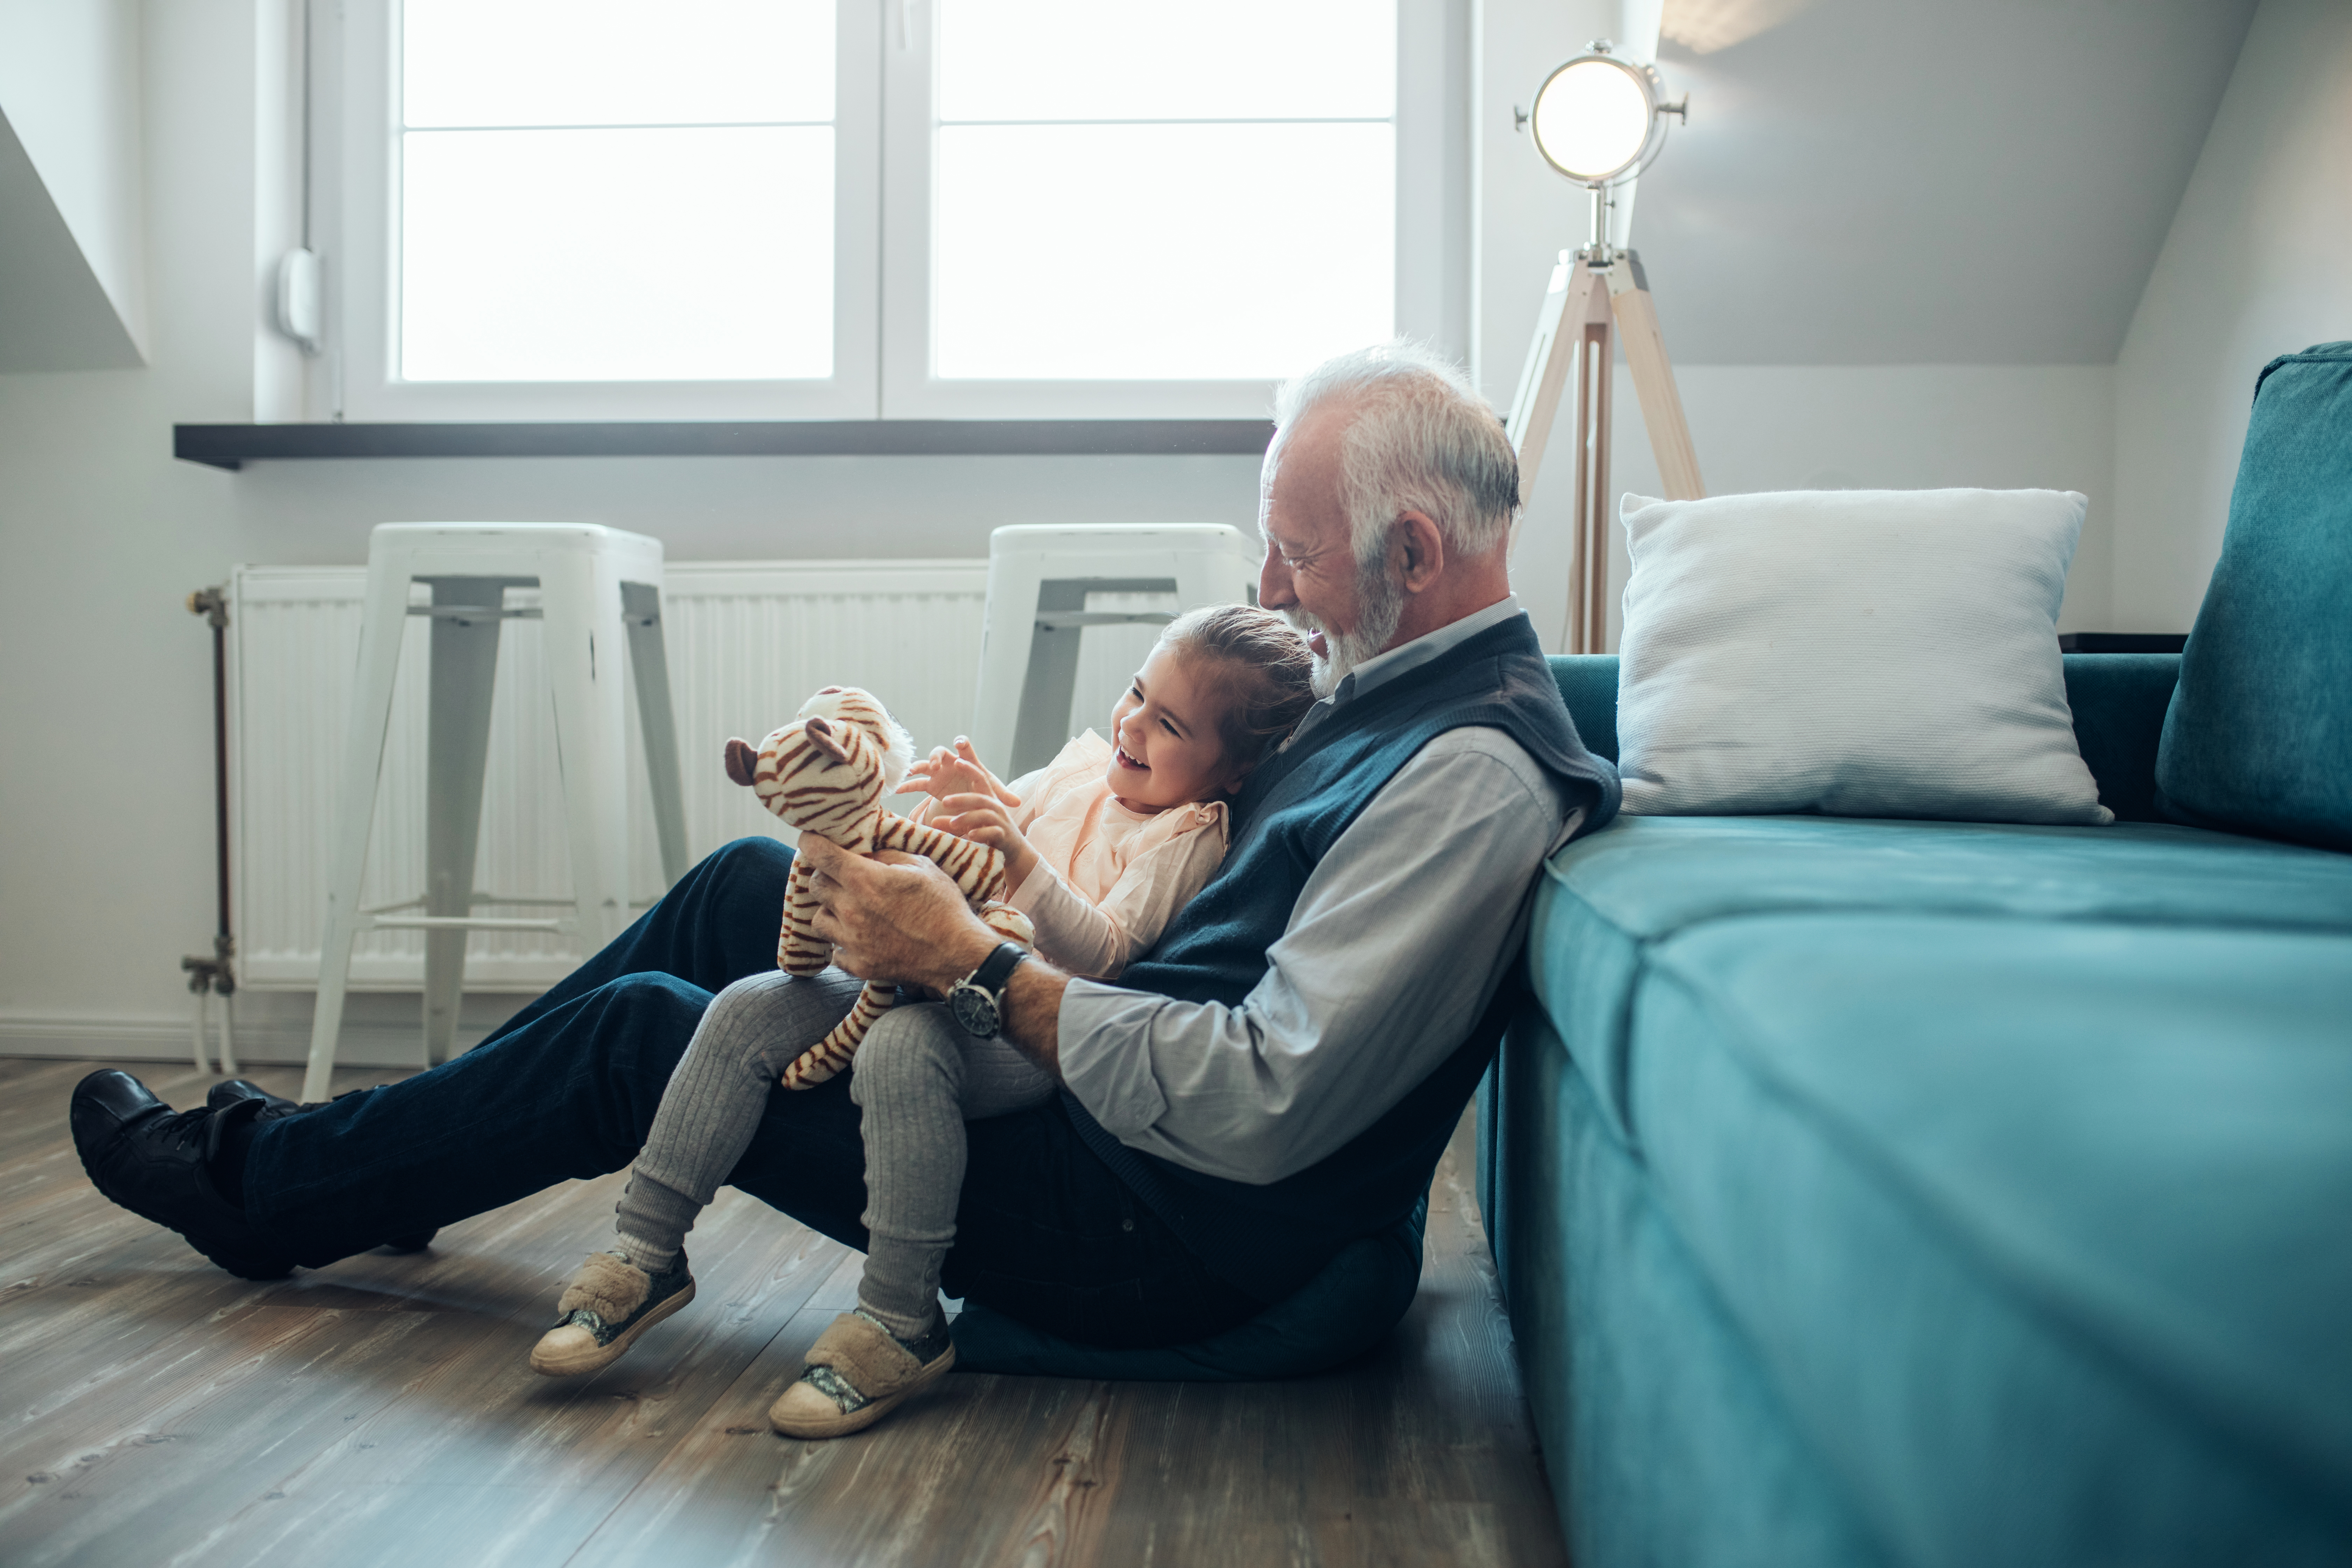 A grandfather sitting on the floor with his granddaughter in his lap | Source: Shutterstock